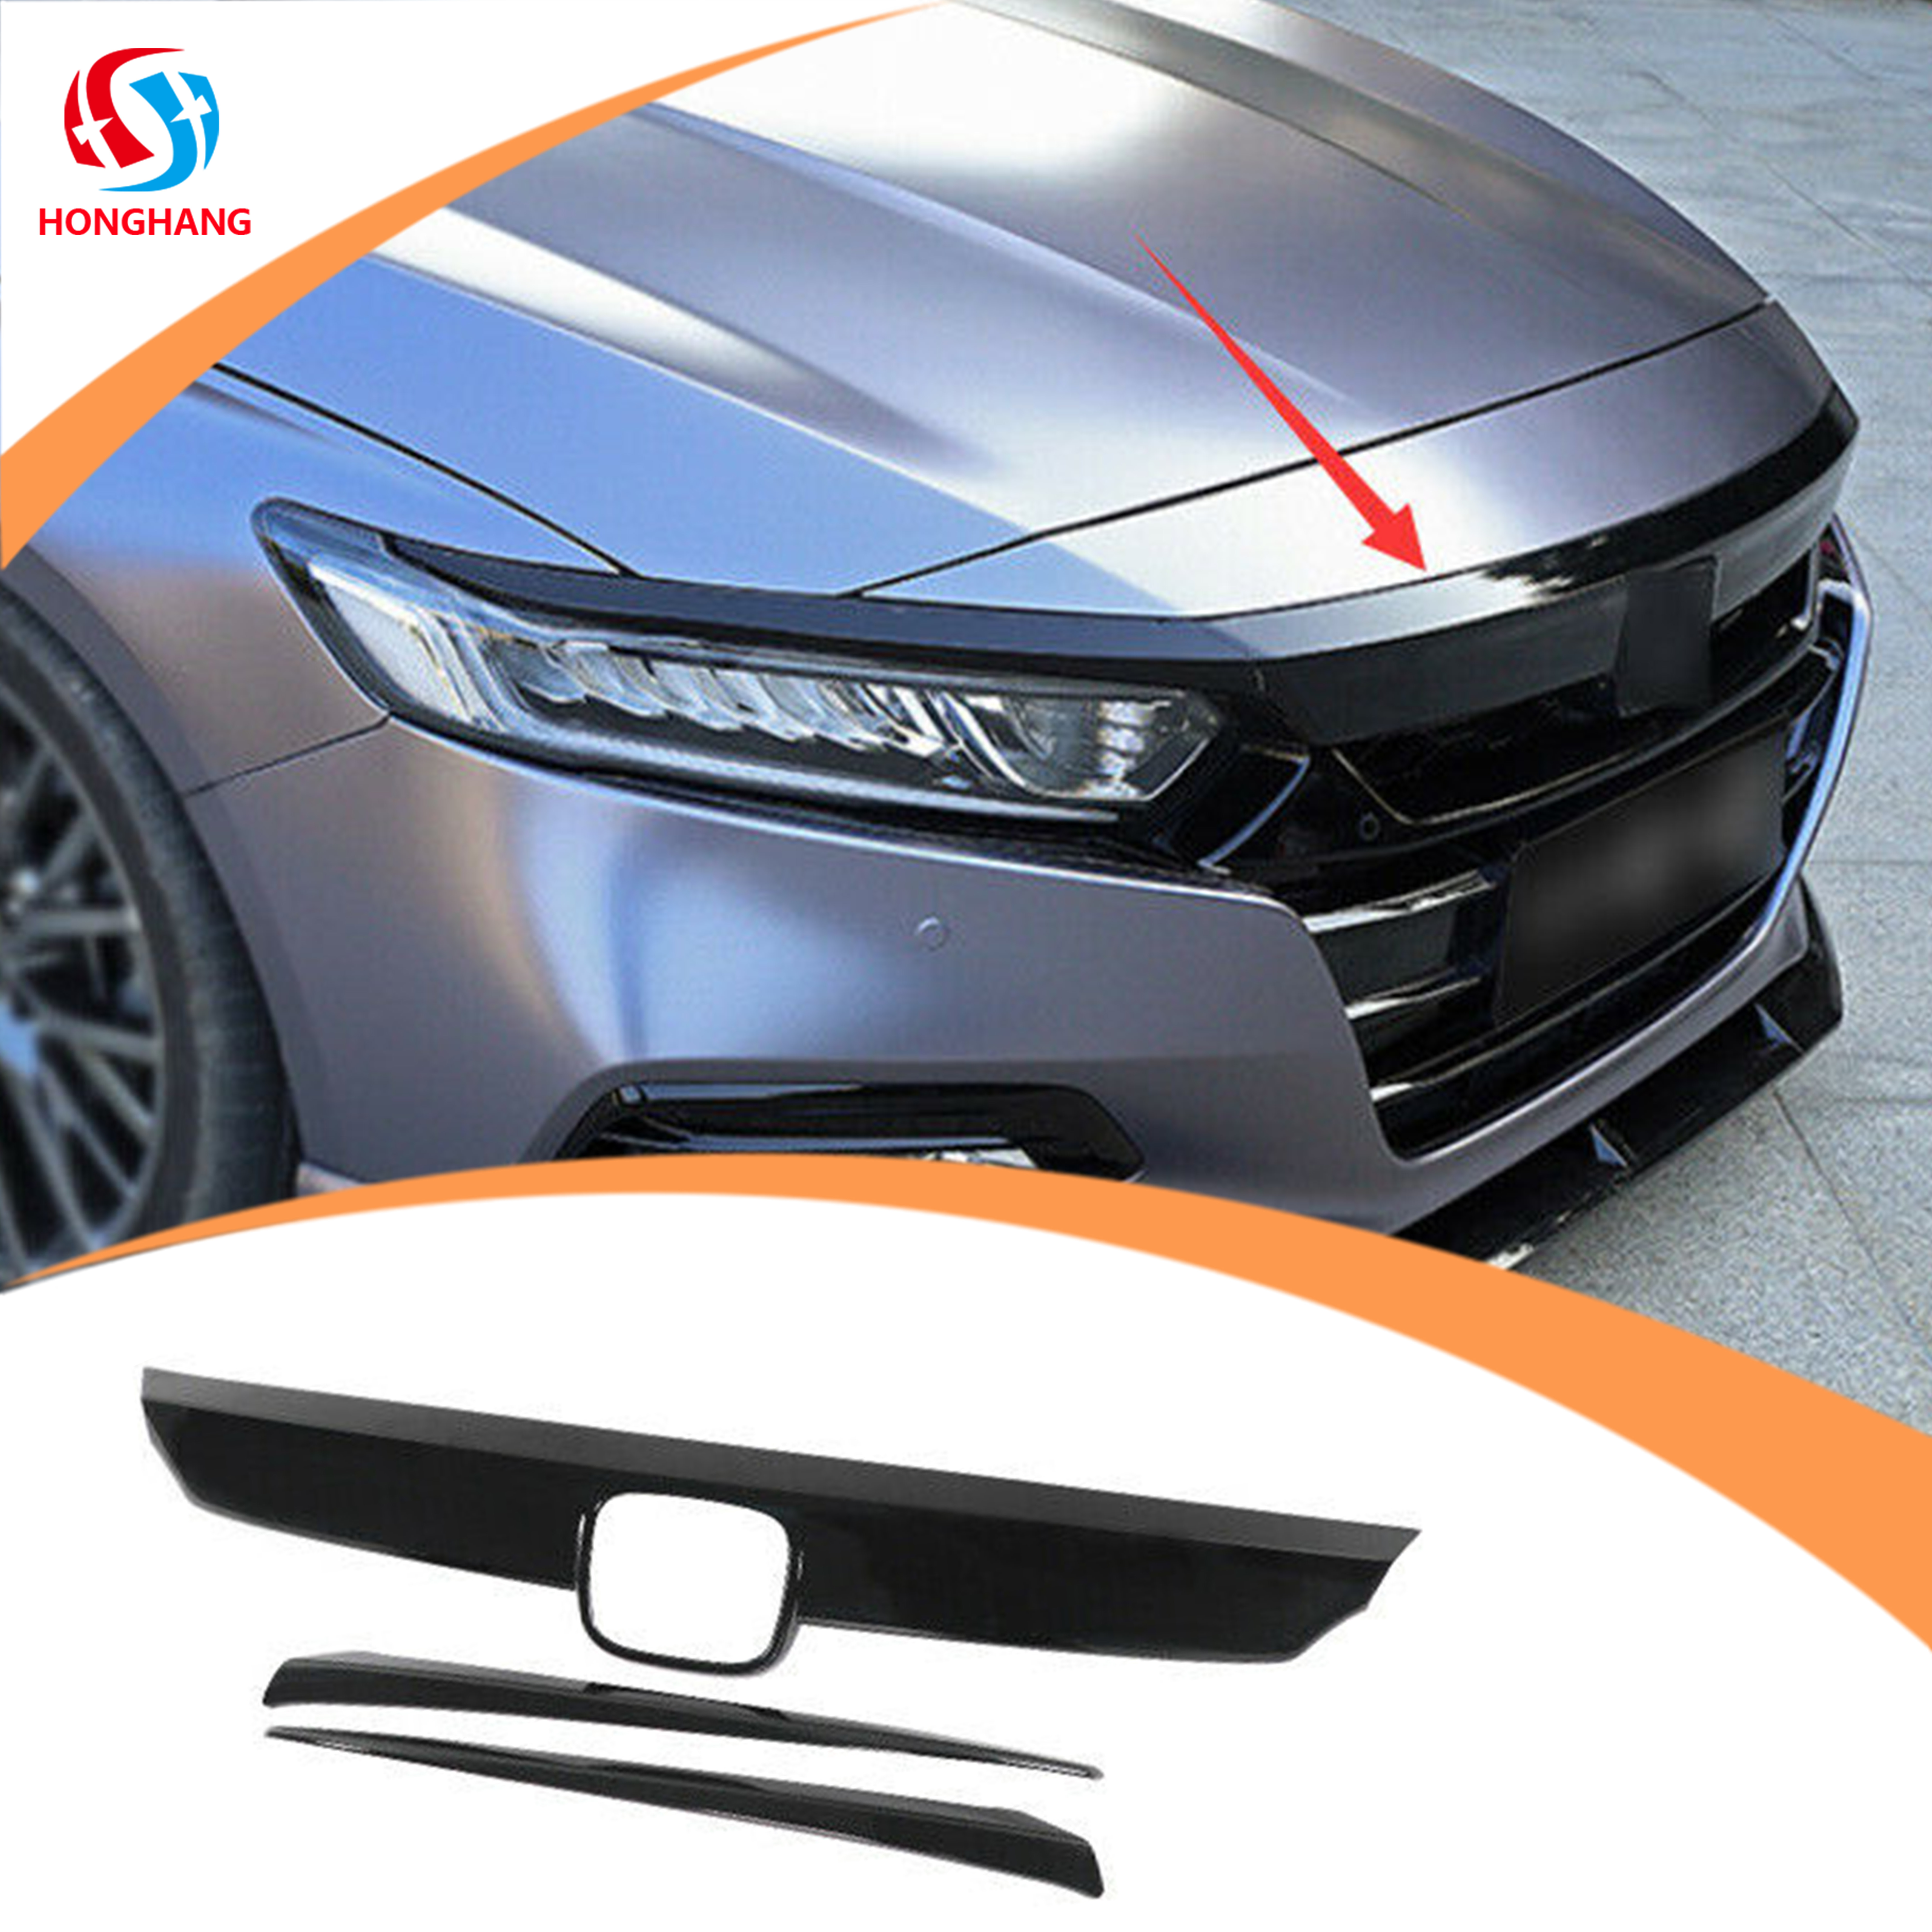 Front Grille Trim For Honda Accord 2018-2020